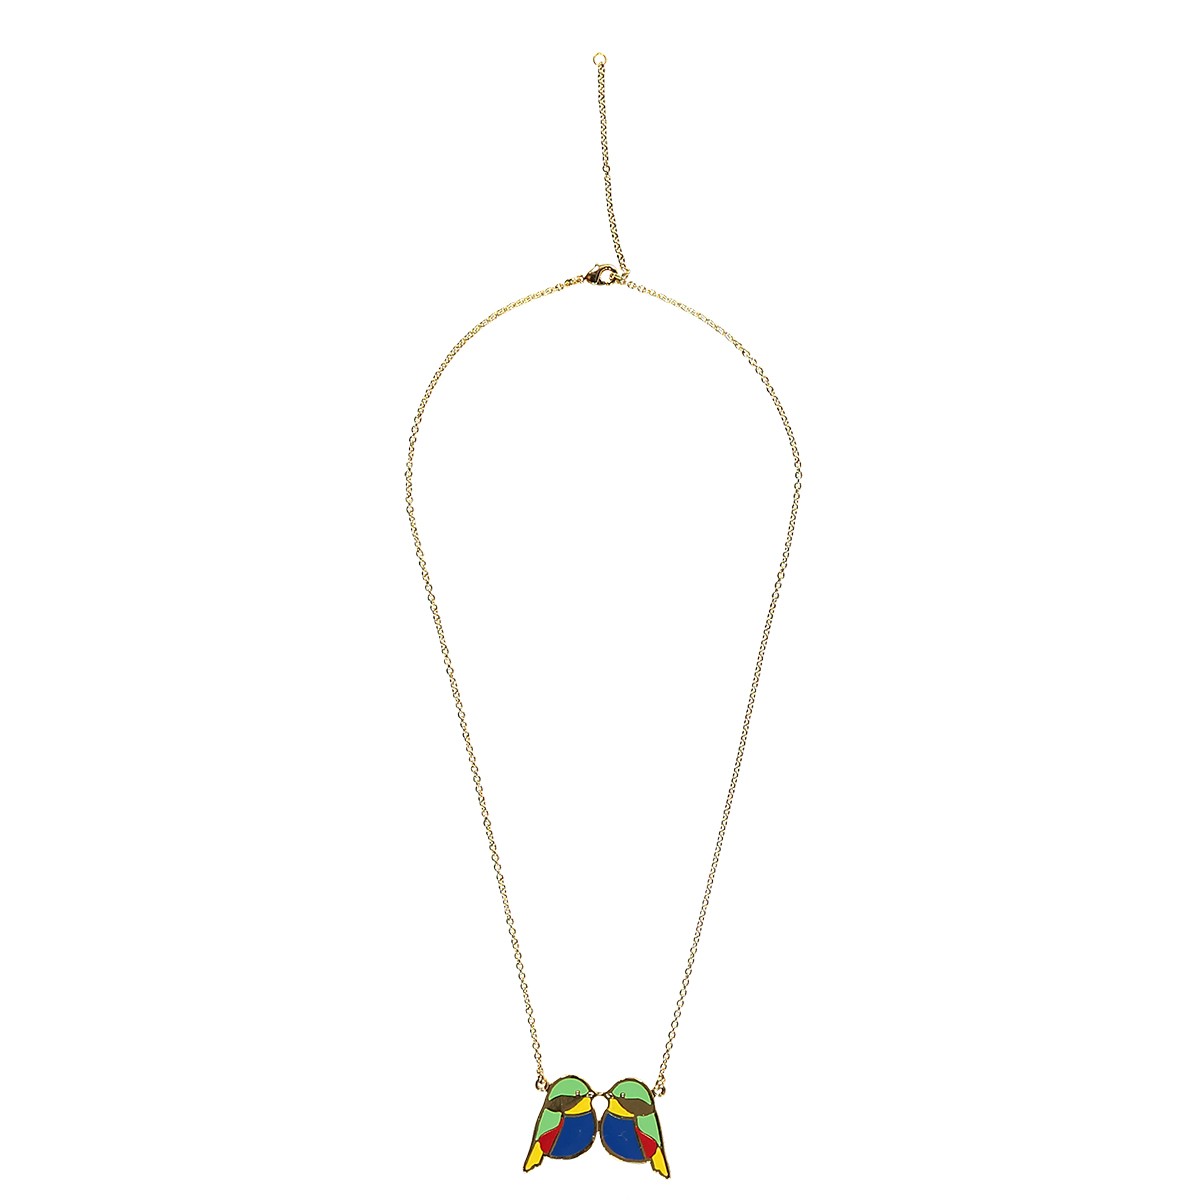 Sid & betty birds necklace - blue and green